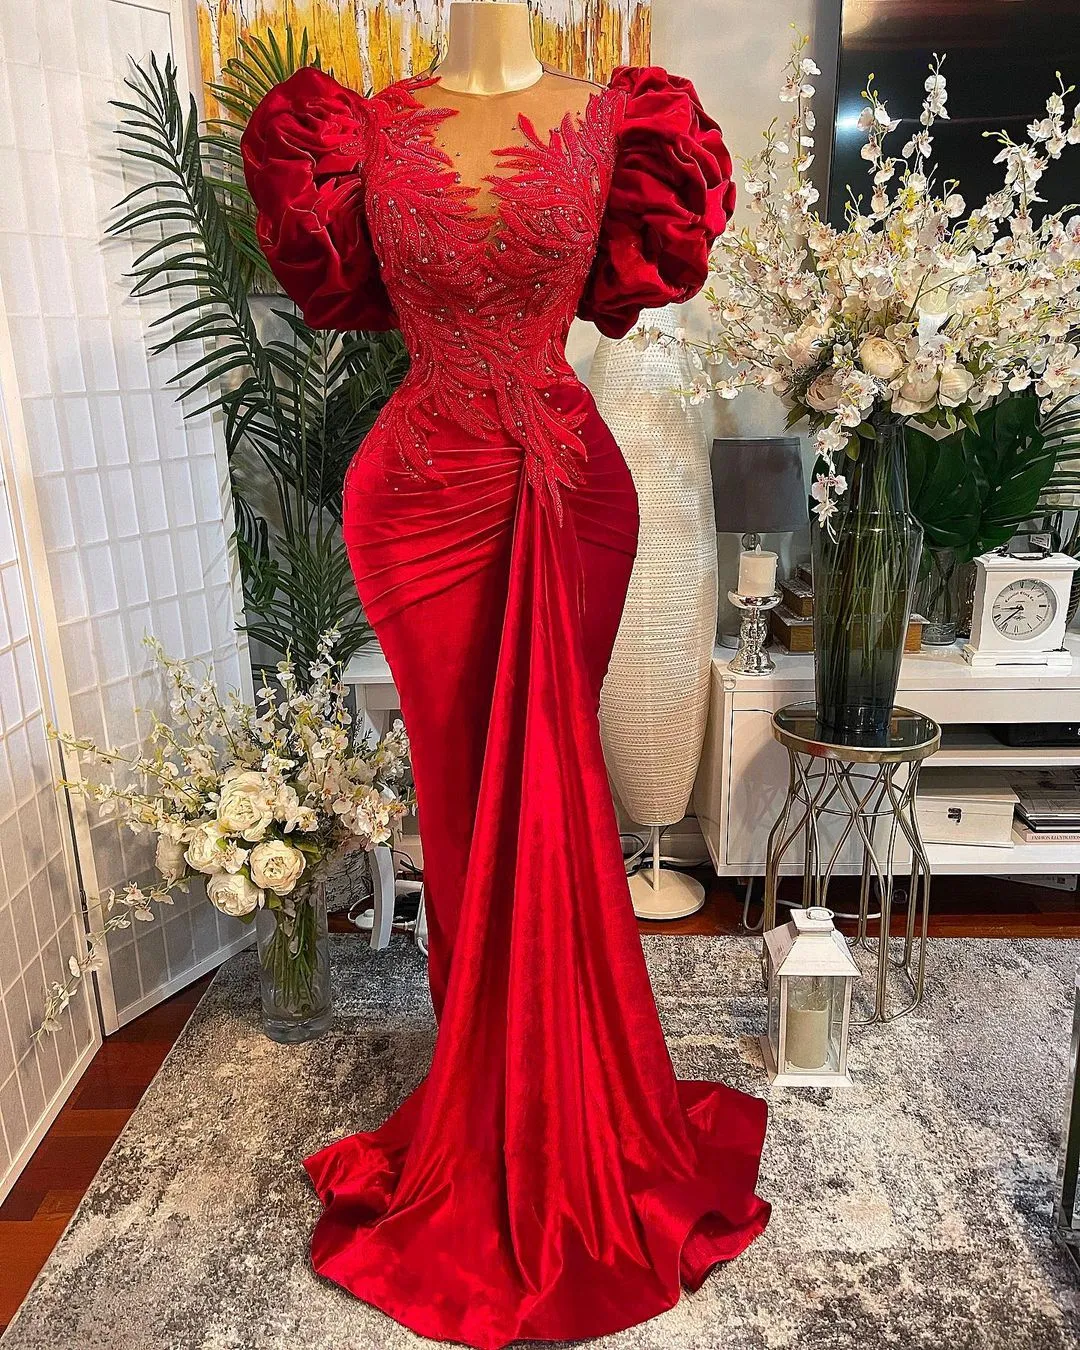 2021 Plus Size Arabic Aso Ebi Red Mermaid Lace Prom Dresses Beaded Sheer Neck Velvet Evening Formal Party Second Reception Gowns Dress ZJ446